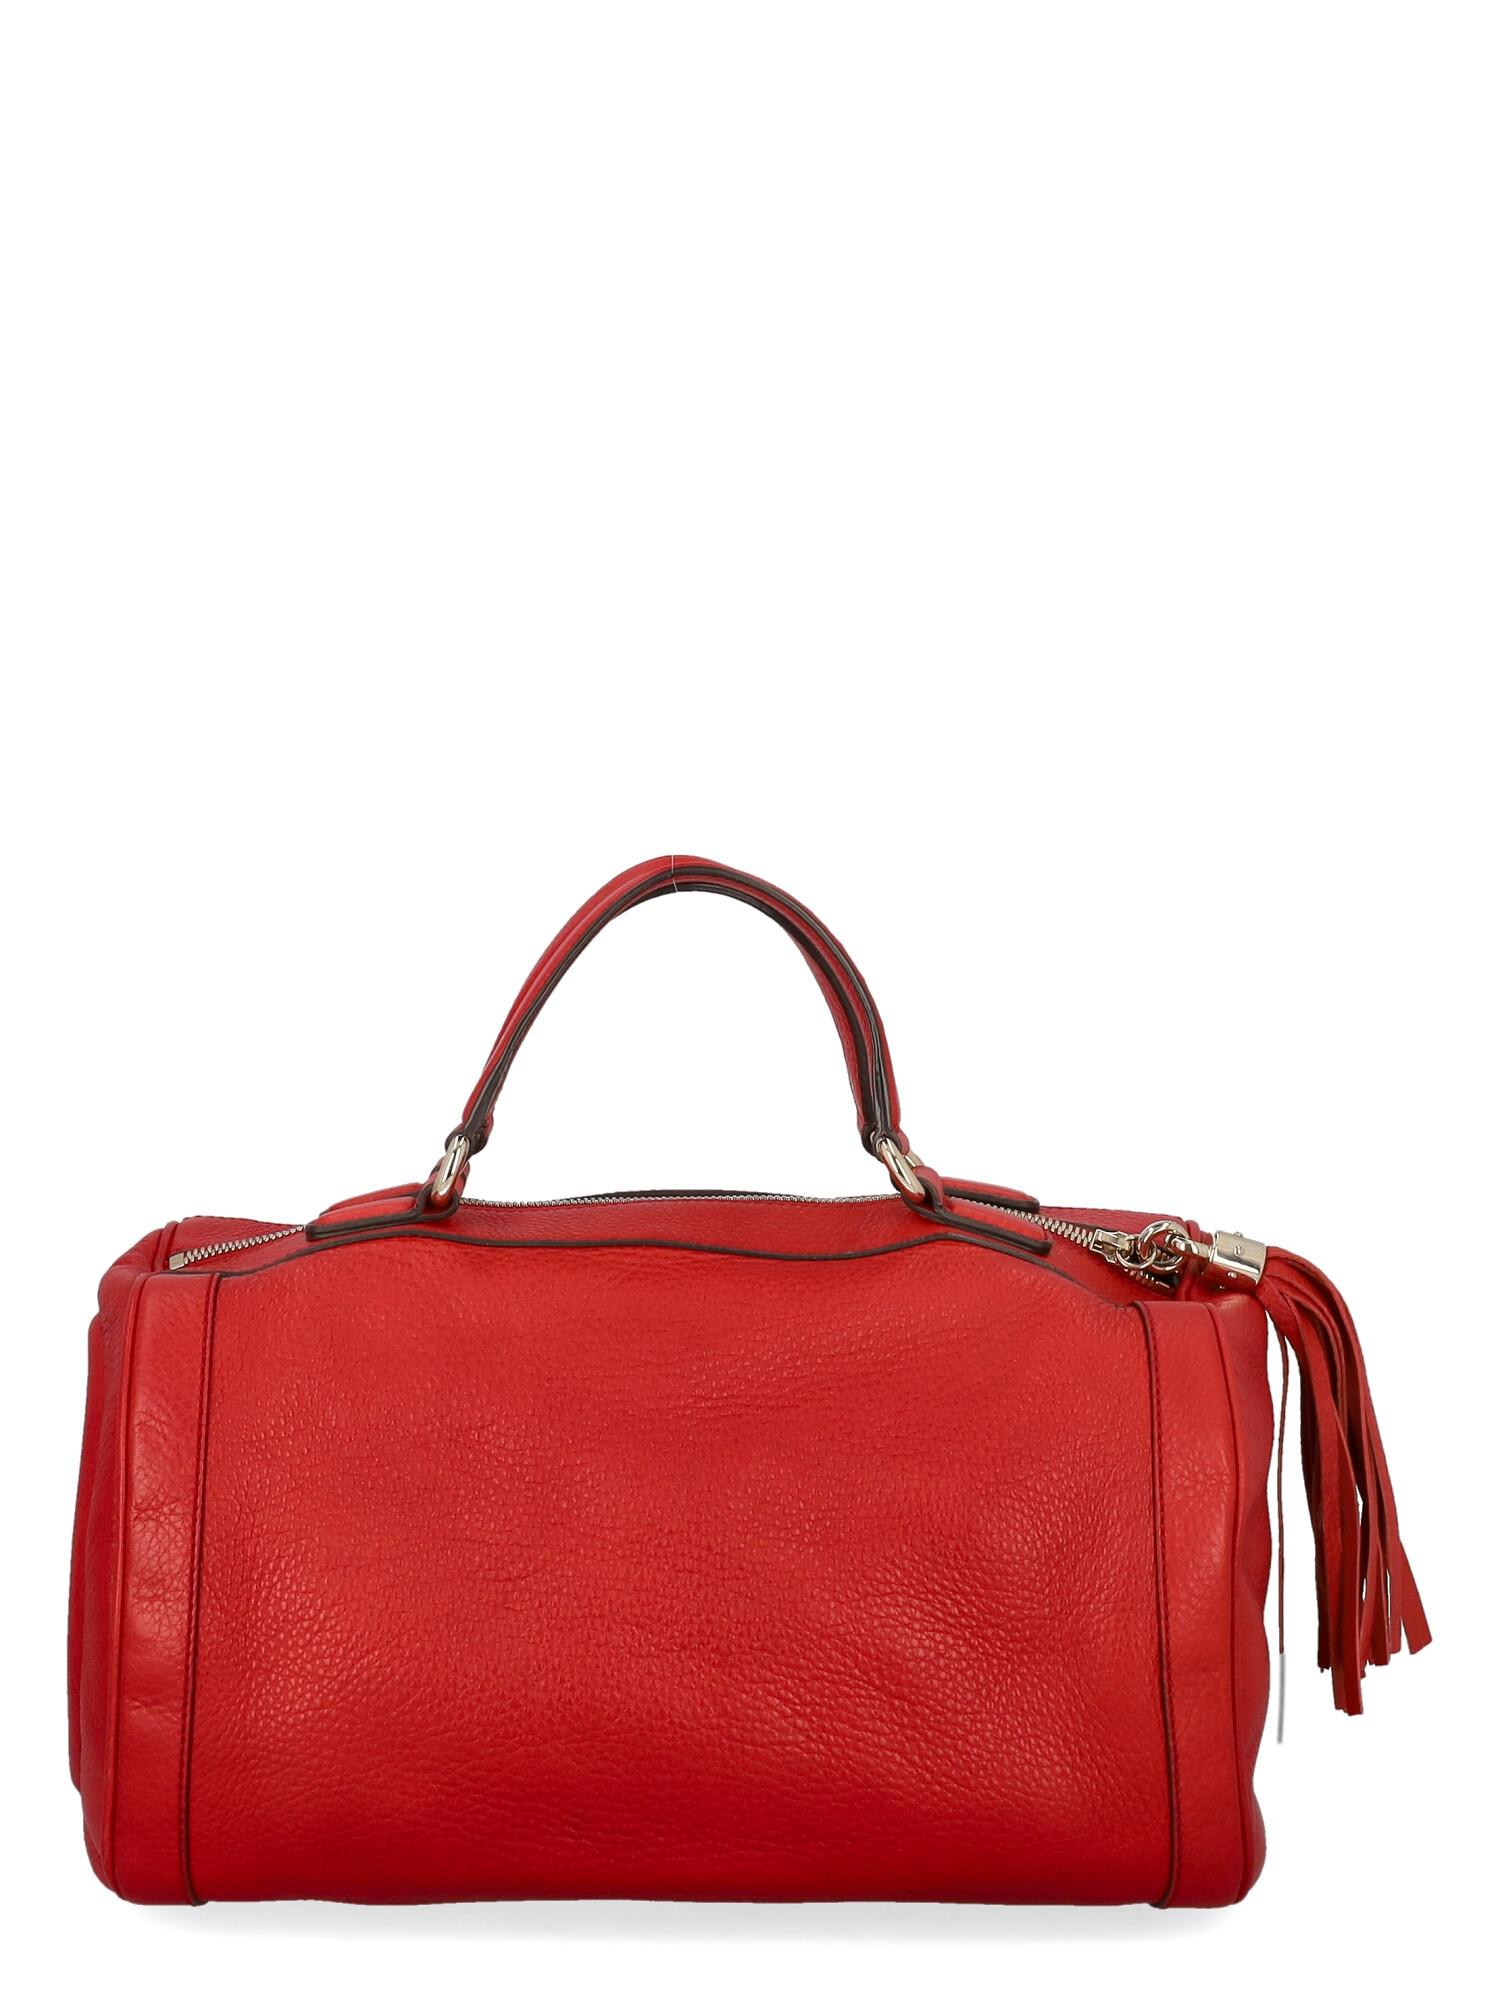 Gucci Women Handbags Boston Red Leather  In Good Condition For Sale In Milan, IT